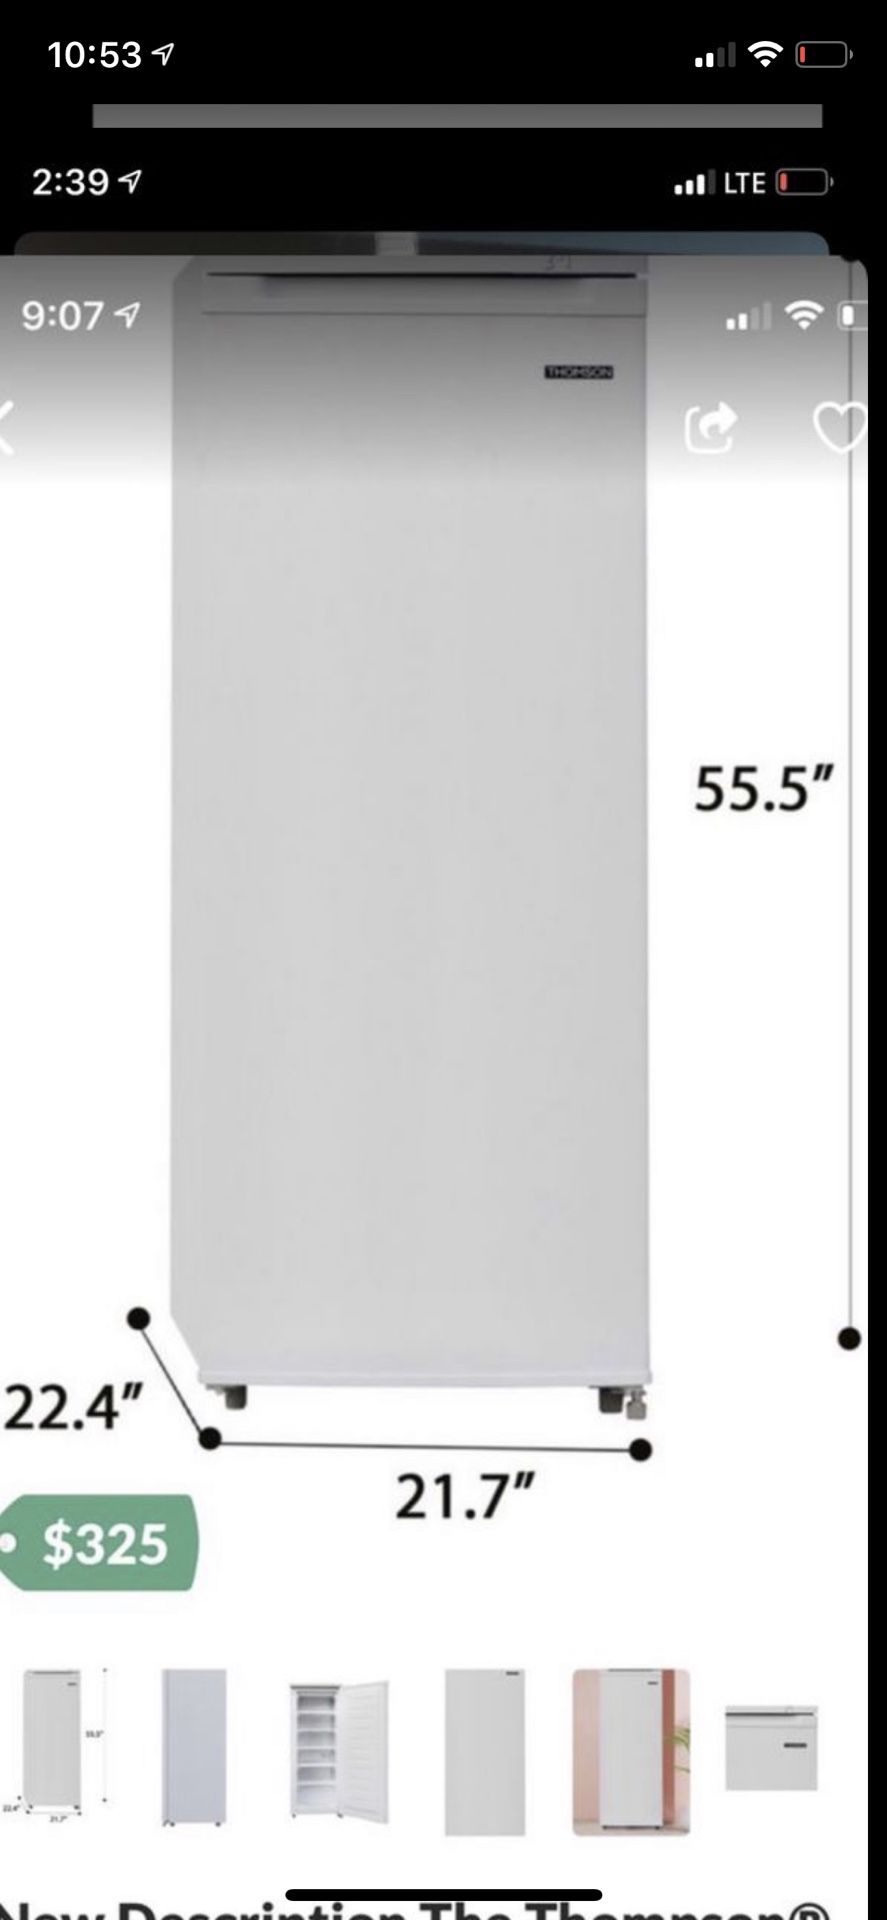 New stand up freezer Upright Freezer (6.5 cu. ft.) is a space-saving, small upright freezer. It is the perfect fit for the garage, dorm or basement a